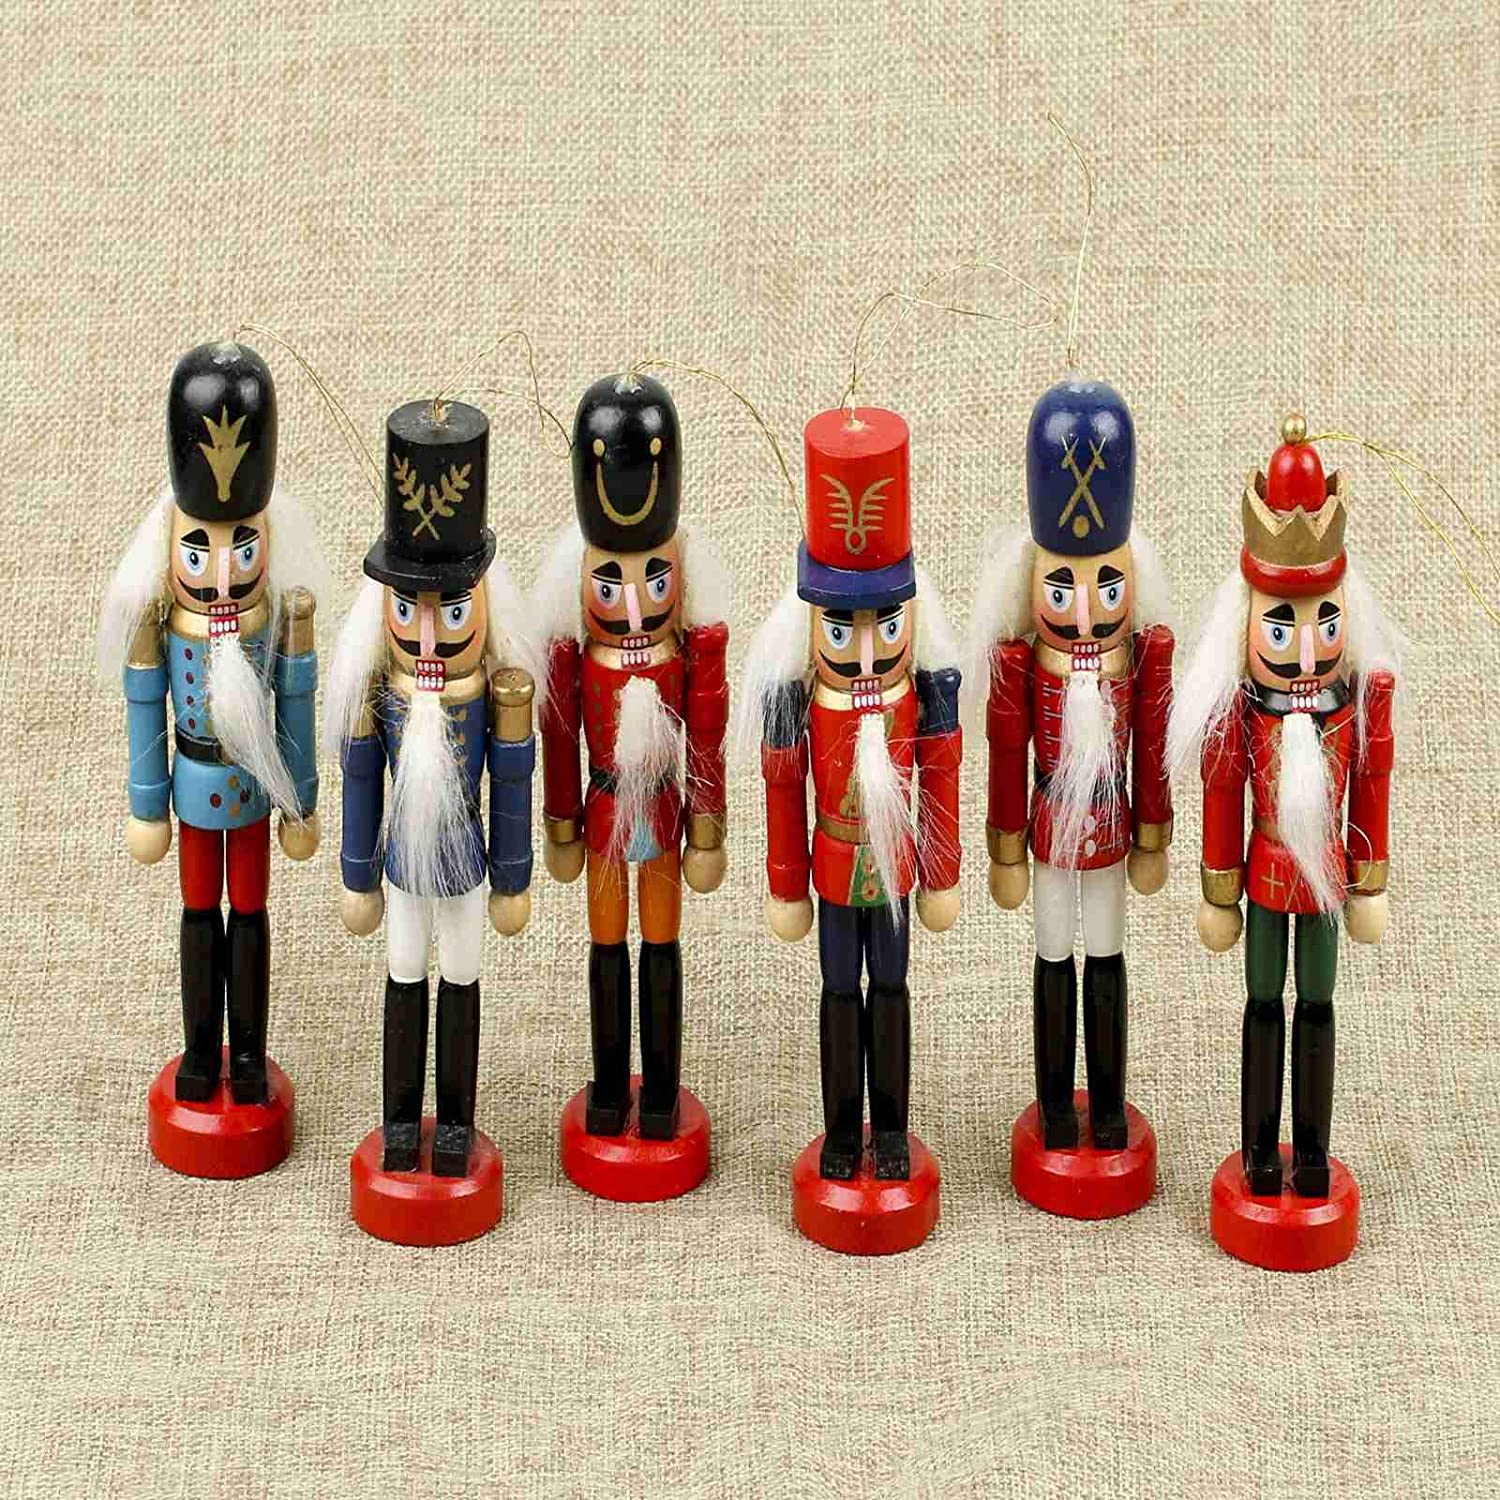 Blue SM SunniMix Christmas Nutcracker Ornaments Wooden Nutcracker Figures Soldier Puppet Toy Christmas Themed Party Outdoor Yard Tree Hanging Decorations 35cm/13.77 